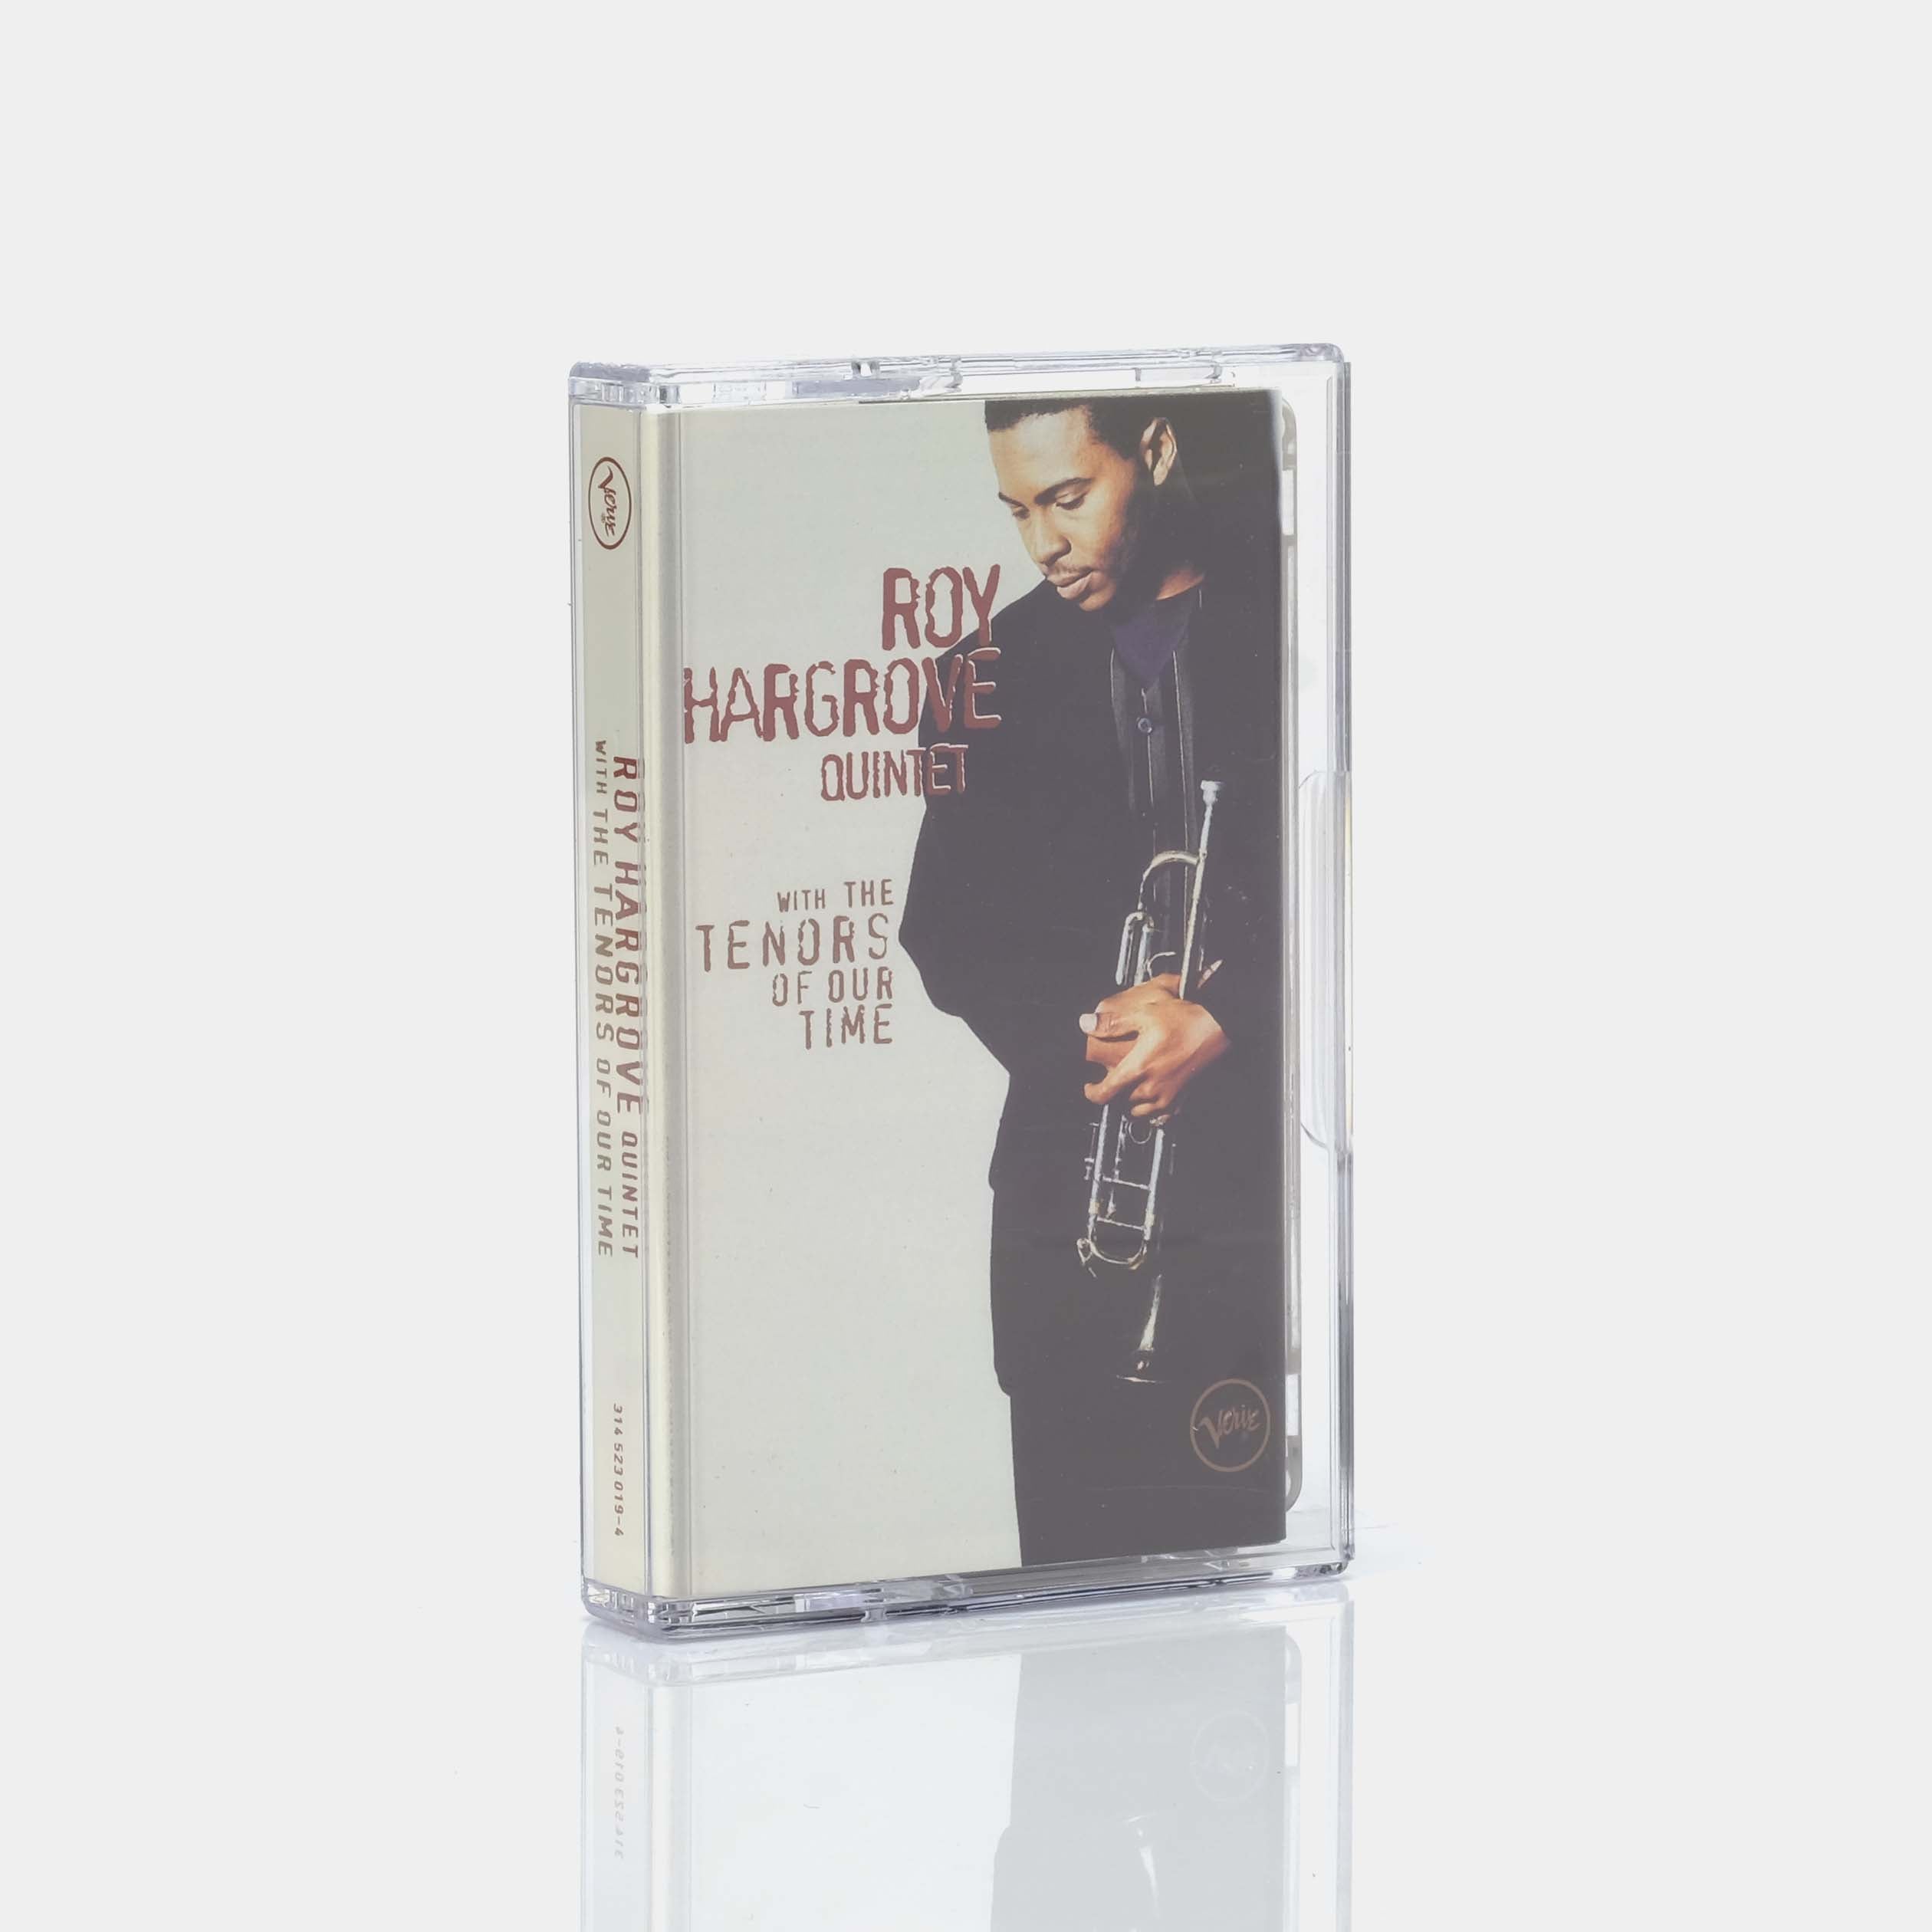 Roy Hargrove Quintet - With The Tenors Of Our Time Cassette Tape